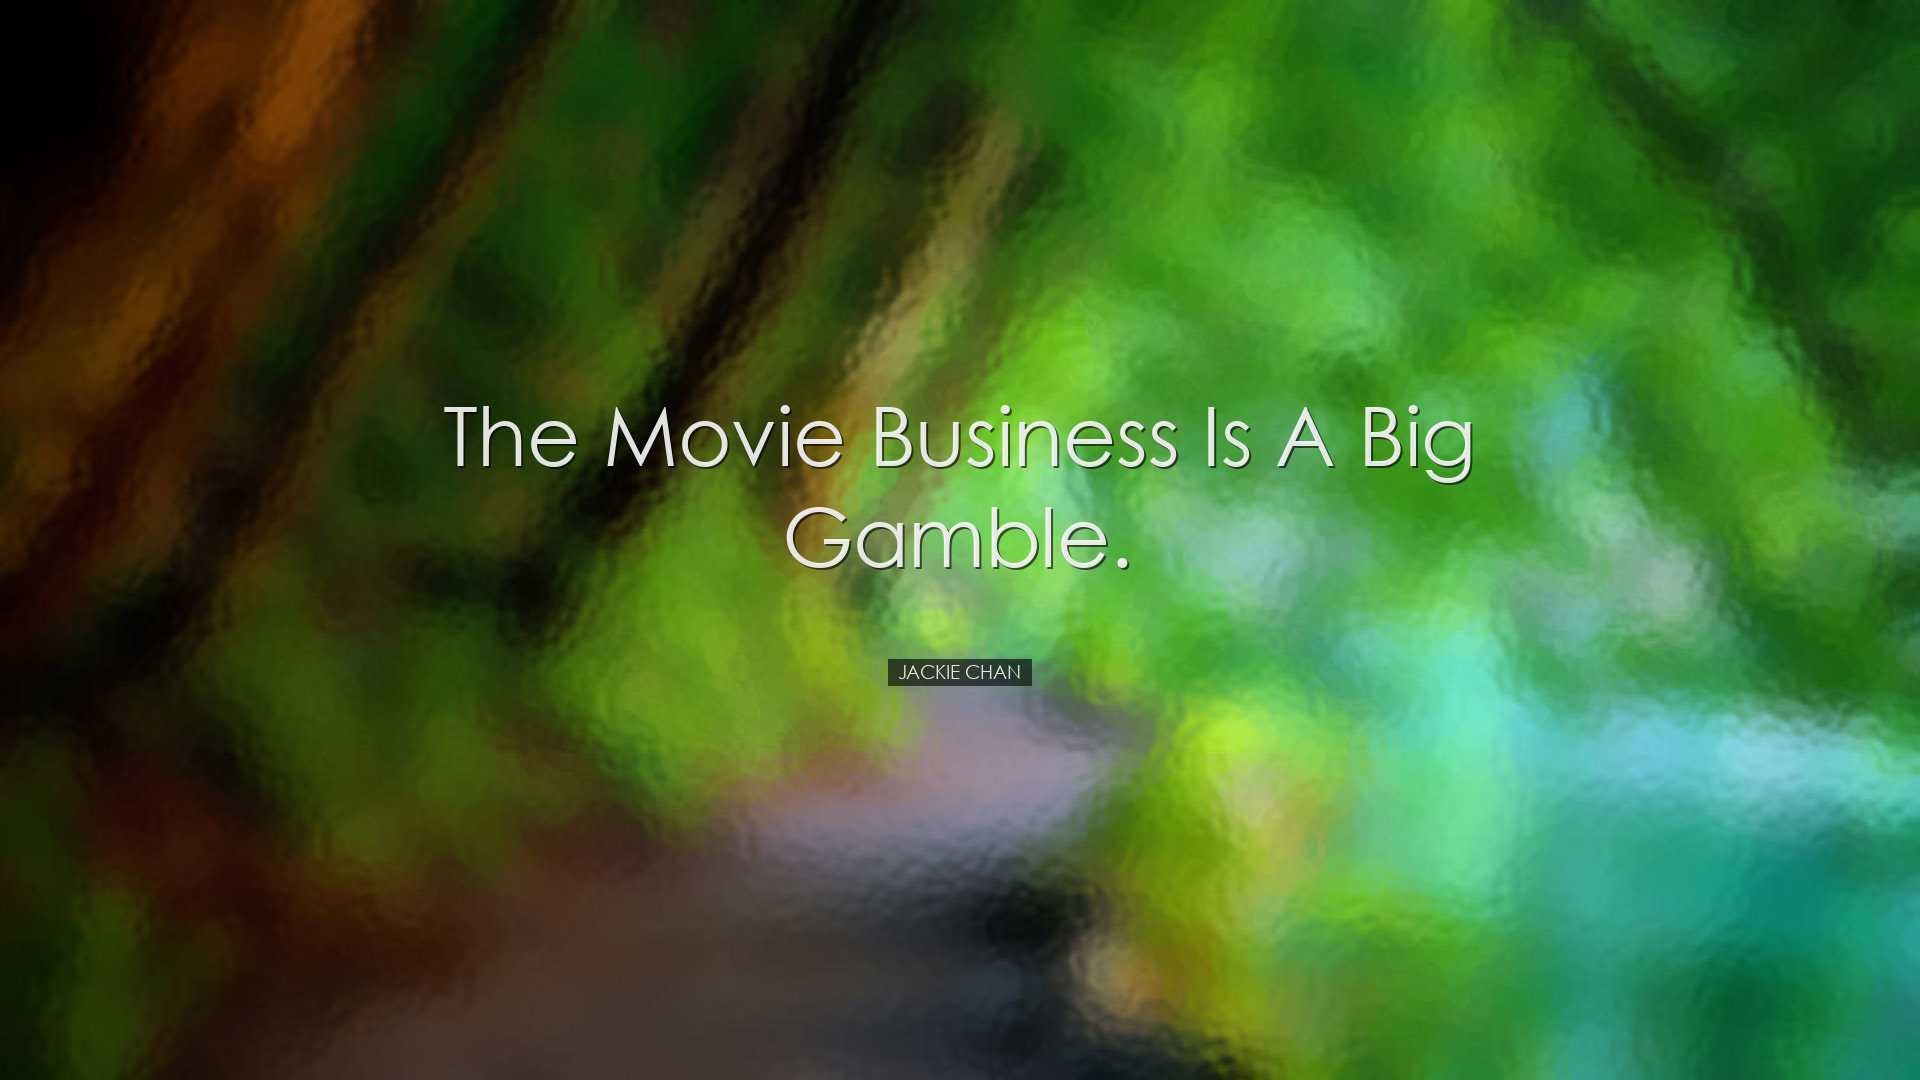 The movie business is a big gamble. - Jackie Chan